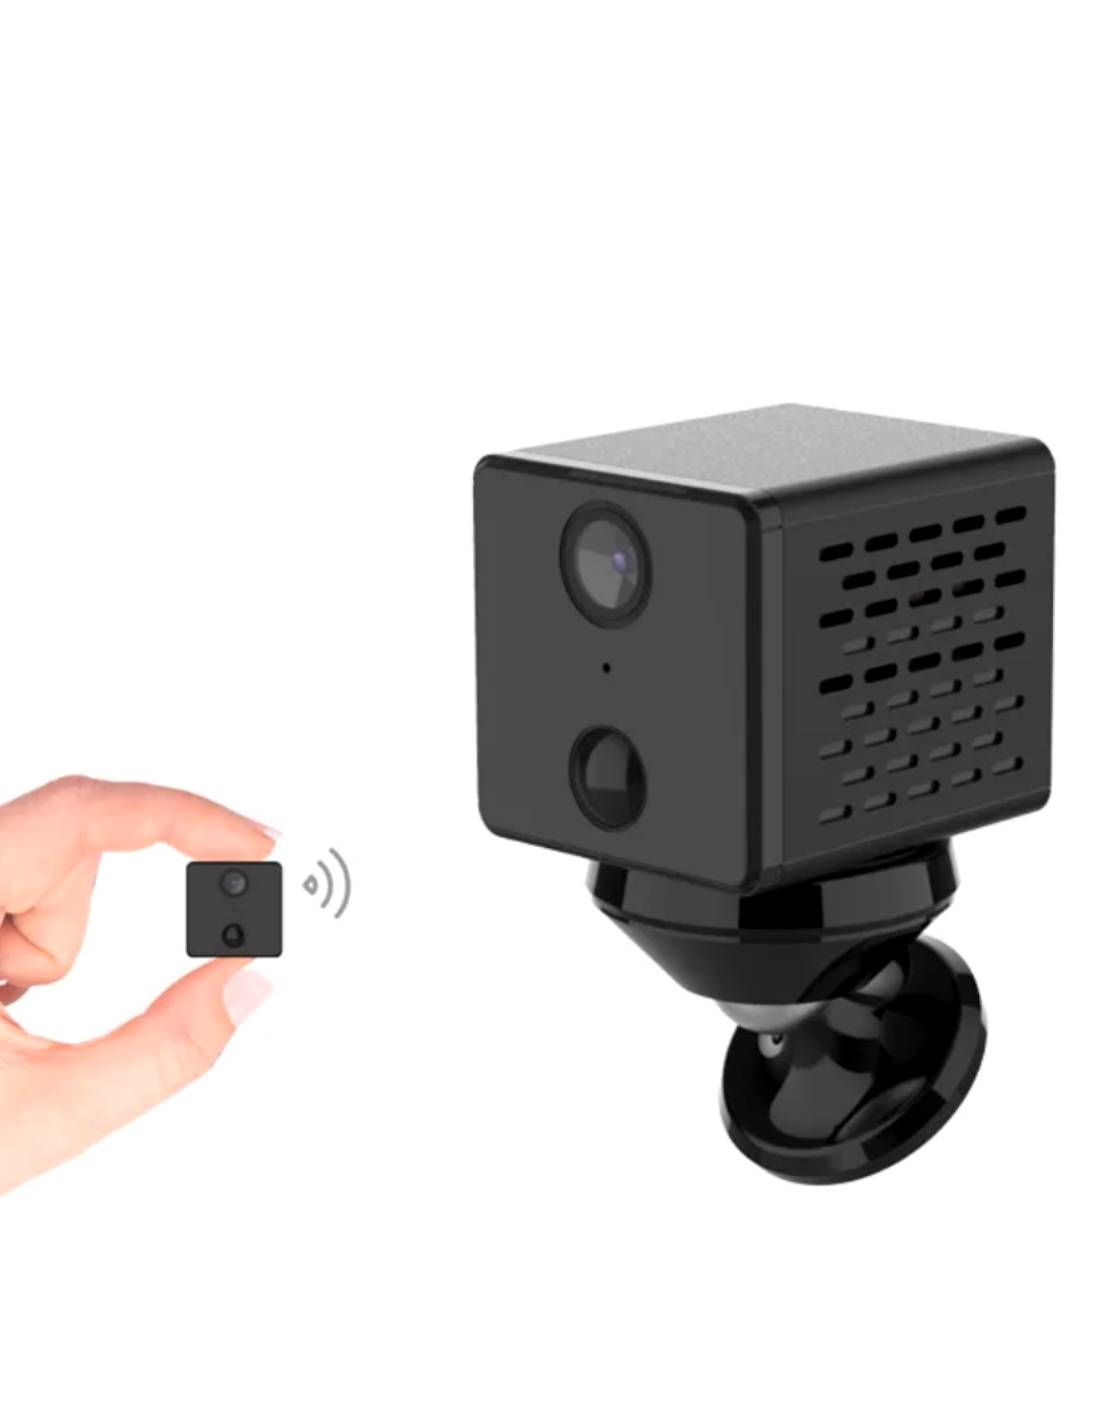 https://securvision.fr/5077-thickbox_default/mini-camera-wifi-full-hd-vision-a-distance-grand-angle-155.jpg